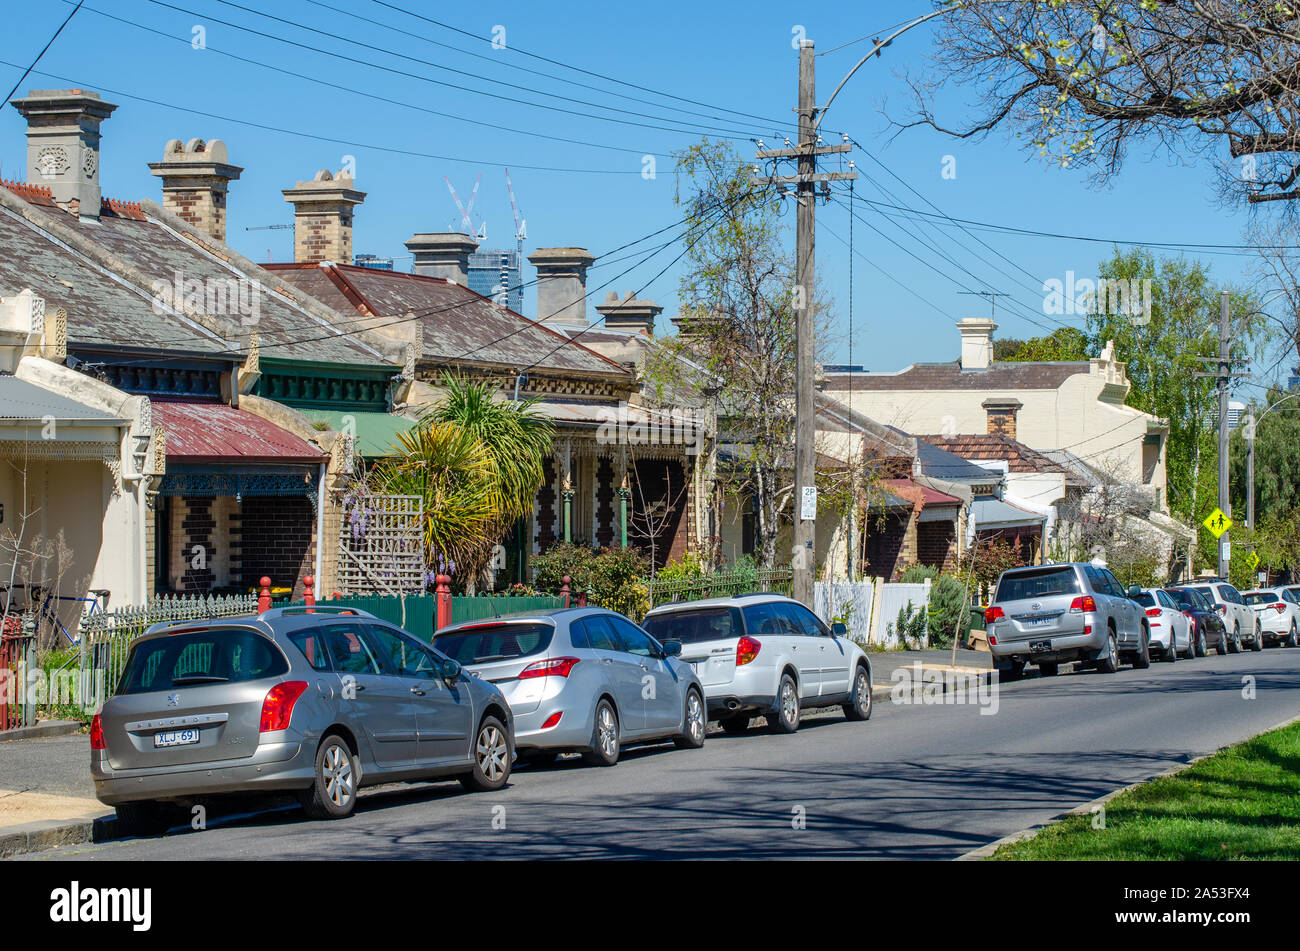 Cars parked along Melbourne's suburban street with Australian historical residential houses. North Melbourne, Victoria,  Australia. Stock Photo